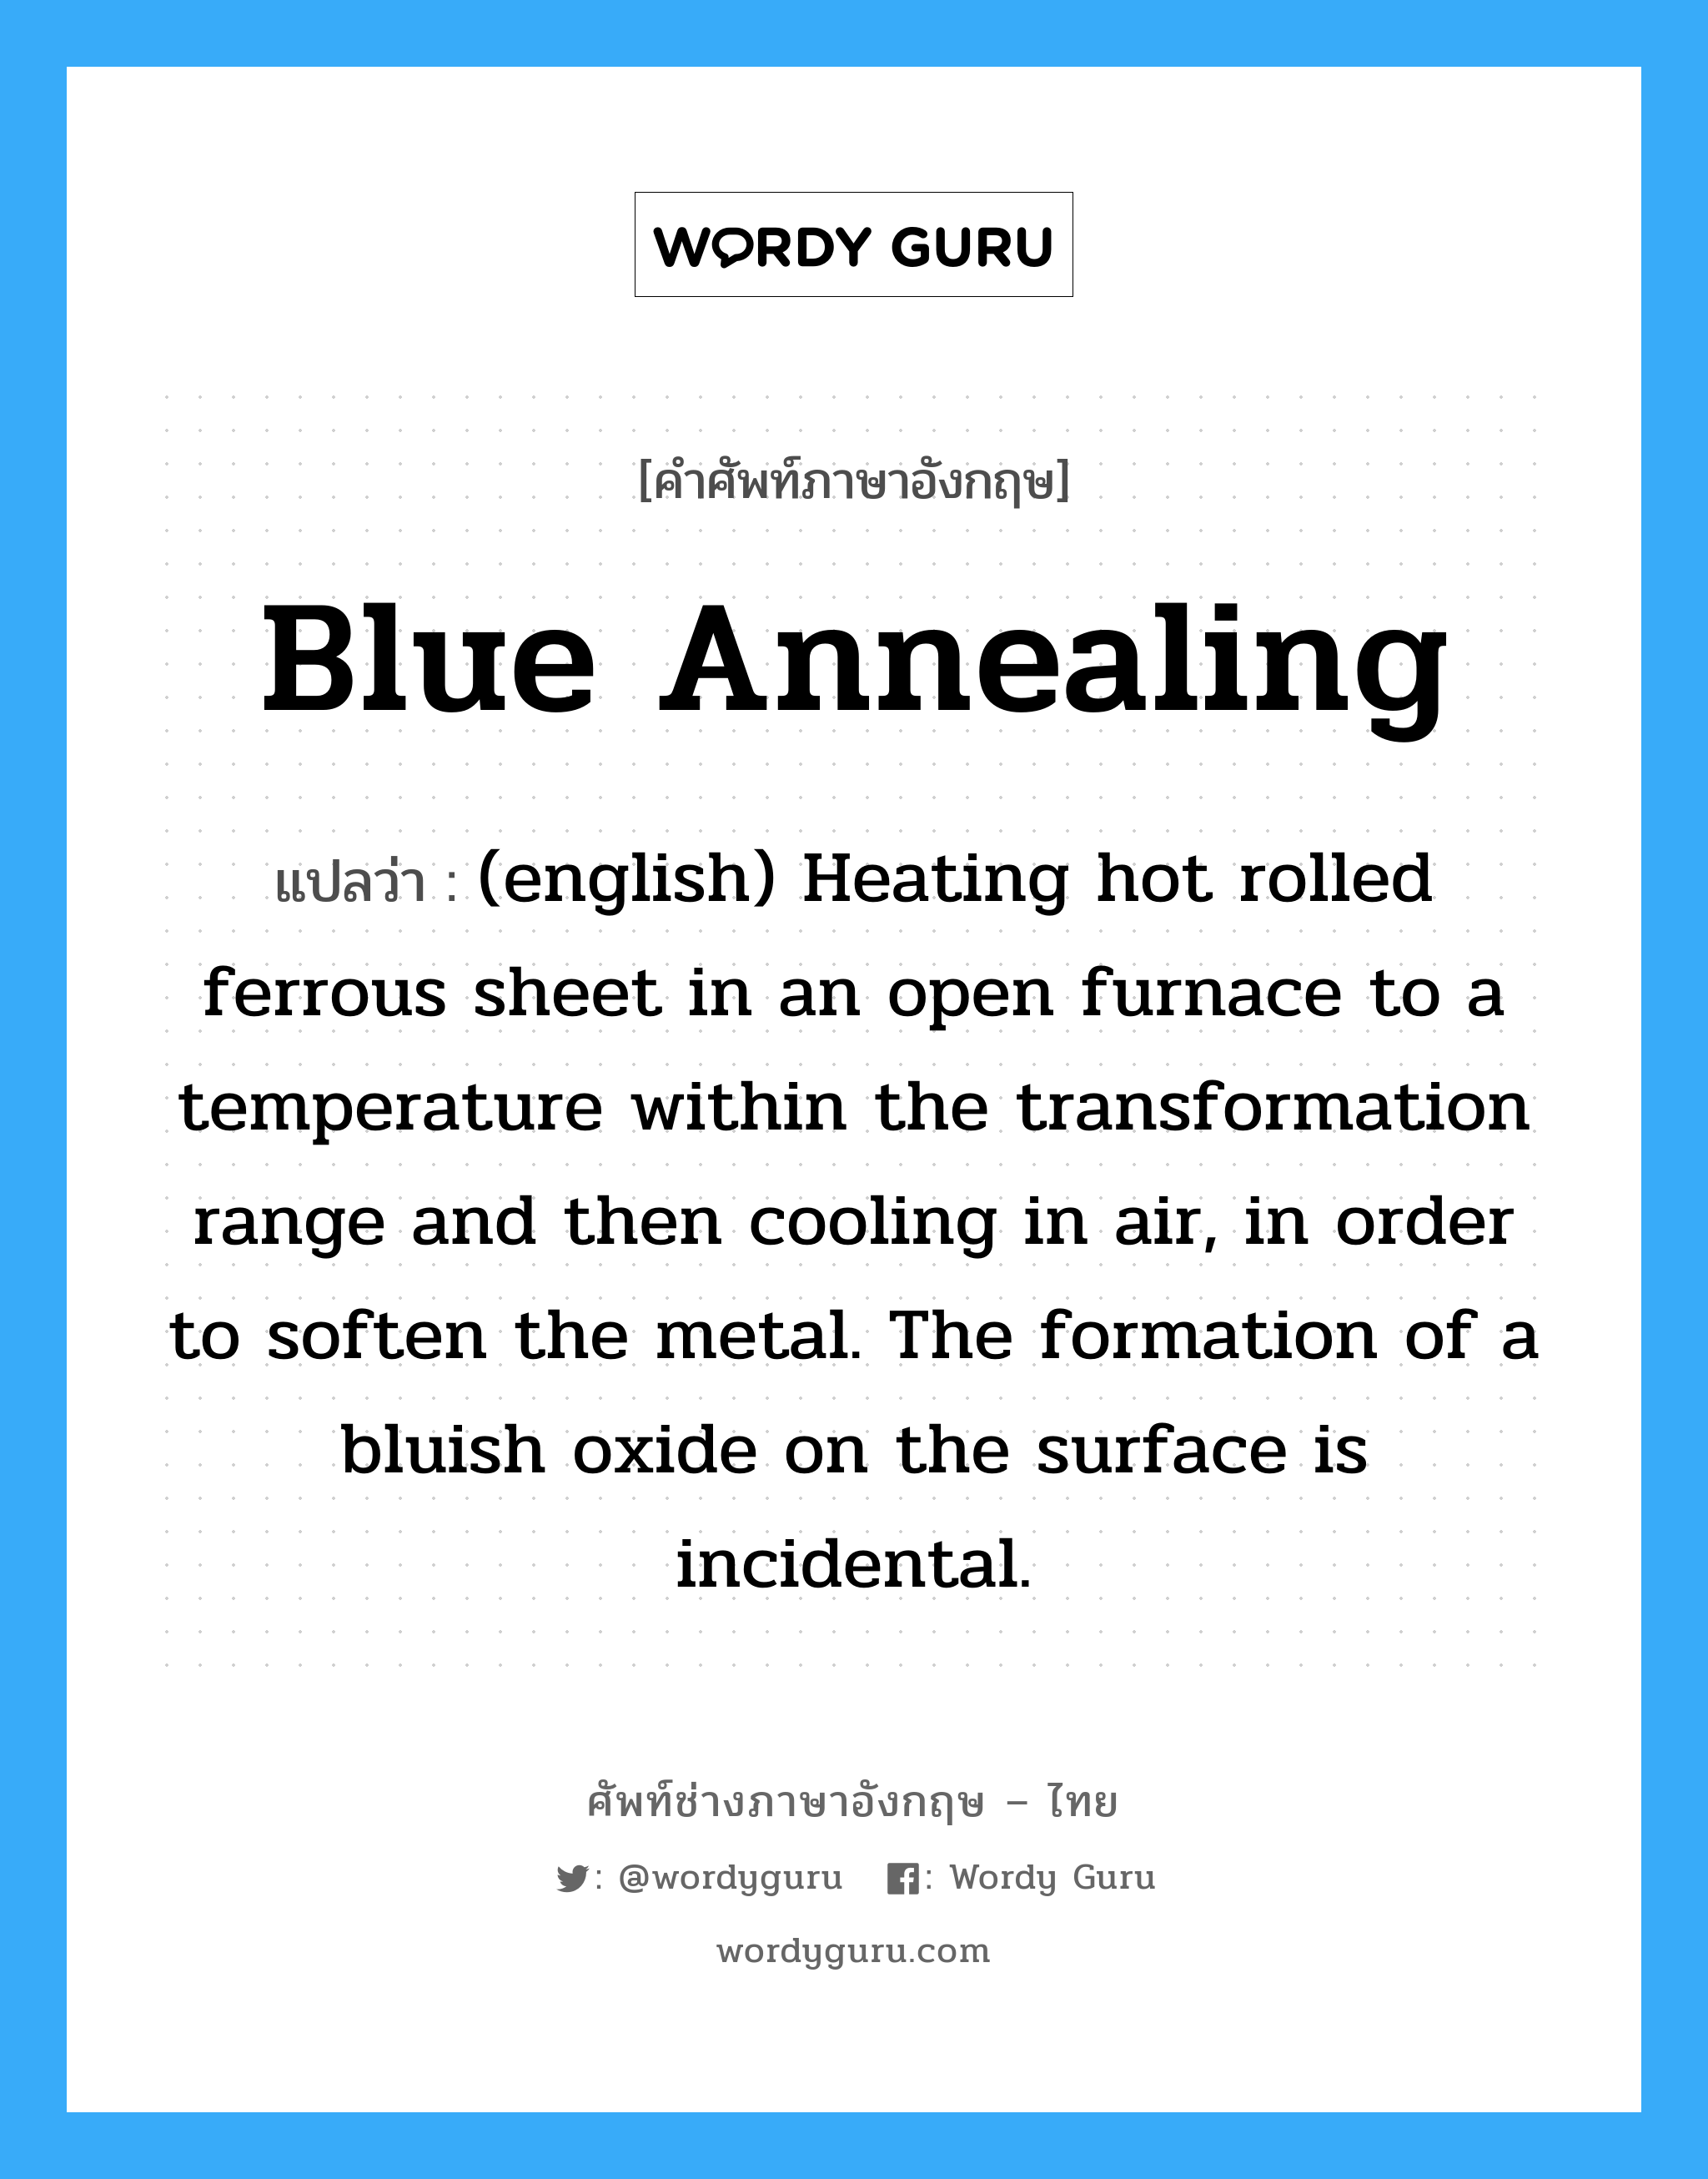 (english) Heating hot rolled ferrous sheet in an open furnace to a temperature within the transformation range and then cooling in air, in order to soften the metal. The formation of a bluish oxide on the surface is incidental. ภาษาอังกฤษ?, คำศัพท์ช่างภาษาอังกฤษ - ไทย (english) Heating hot rolled ferrous sheet in an open furnace to a temperature within the transformation range and then cooling in air, in order to soften the metal. The formation of a bluish oxide on the surface is incidental. คำศัพท์ภาษาอังกฤษ (english) Heating hot rolled ferrous sheet in an open furnace to a temperature within the transformation range and then cooling in air, in order to soften the metal. The formation of a bluish oxide on the surface is incidental. แปลว่า Blue Annealing